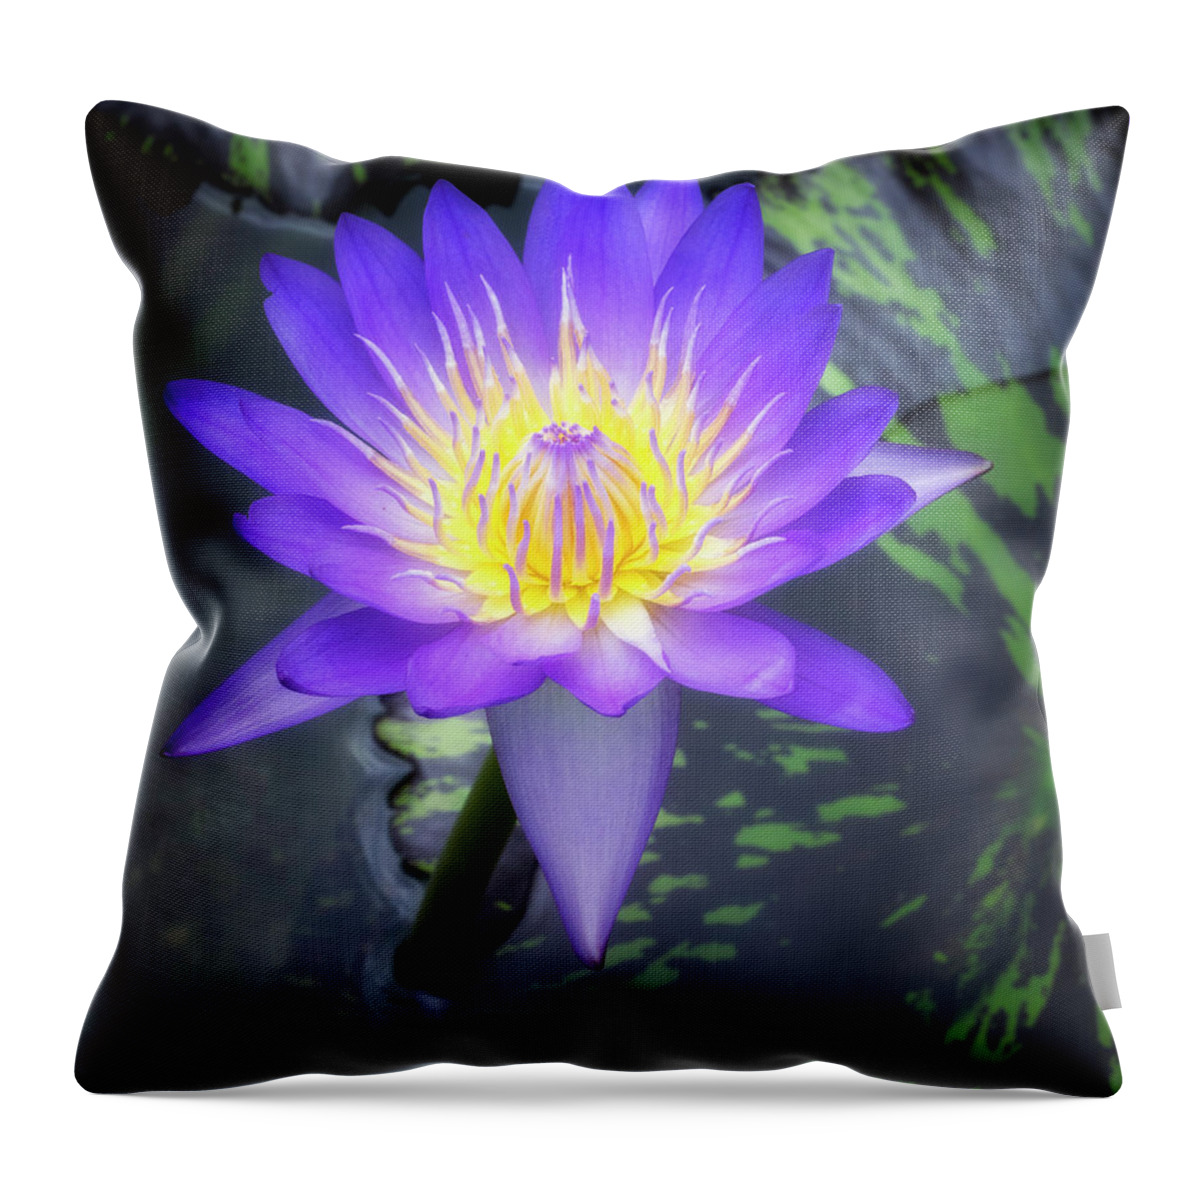 Aquatic Throw Pillow featuring the photograph Waterlily is a popular aquatic plant. by Usha Peddamatham